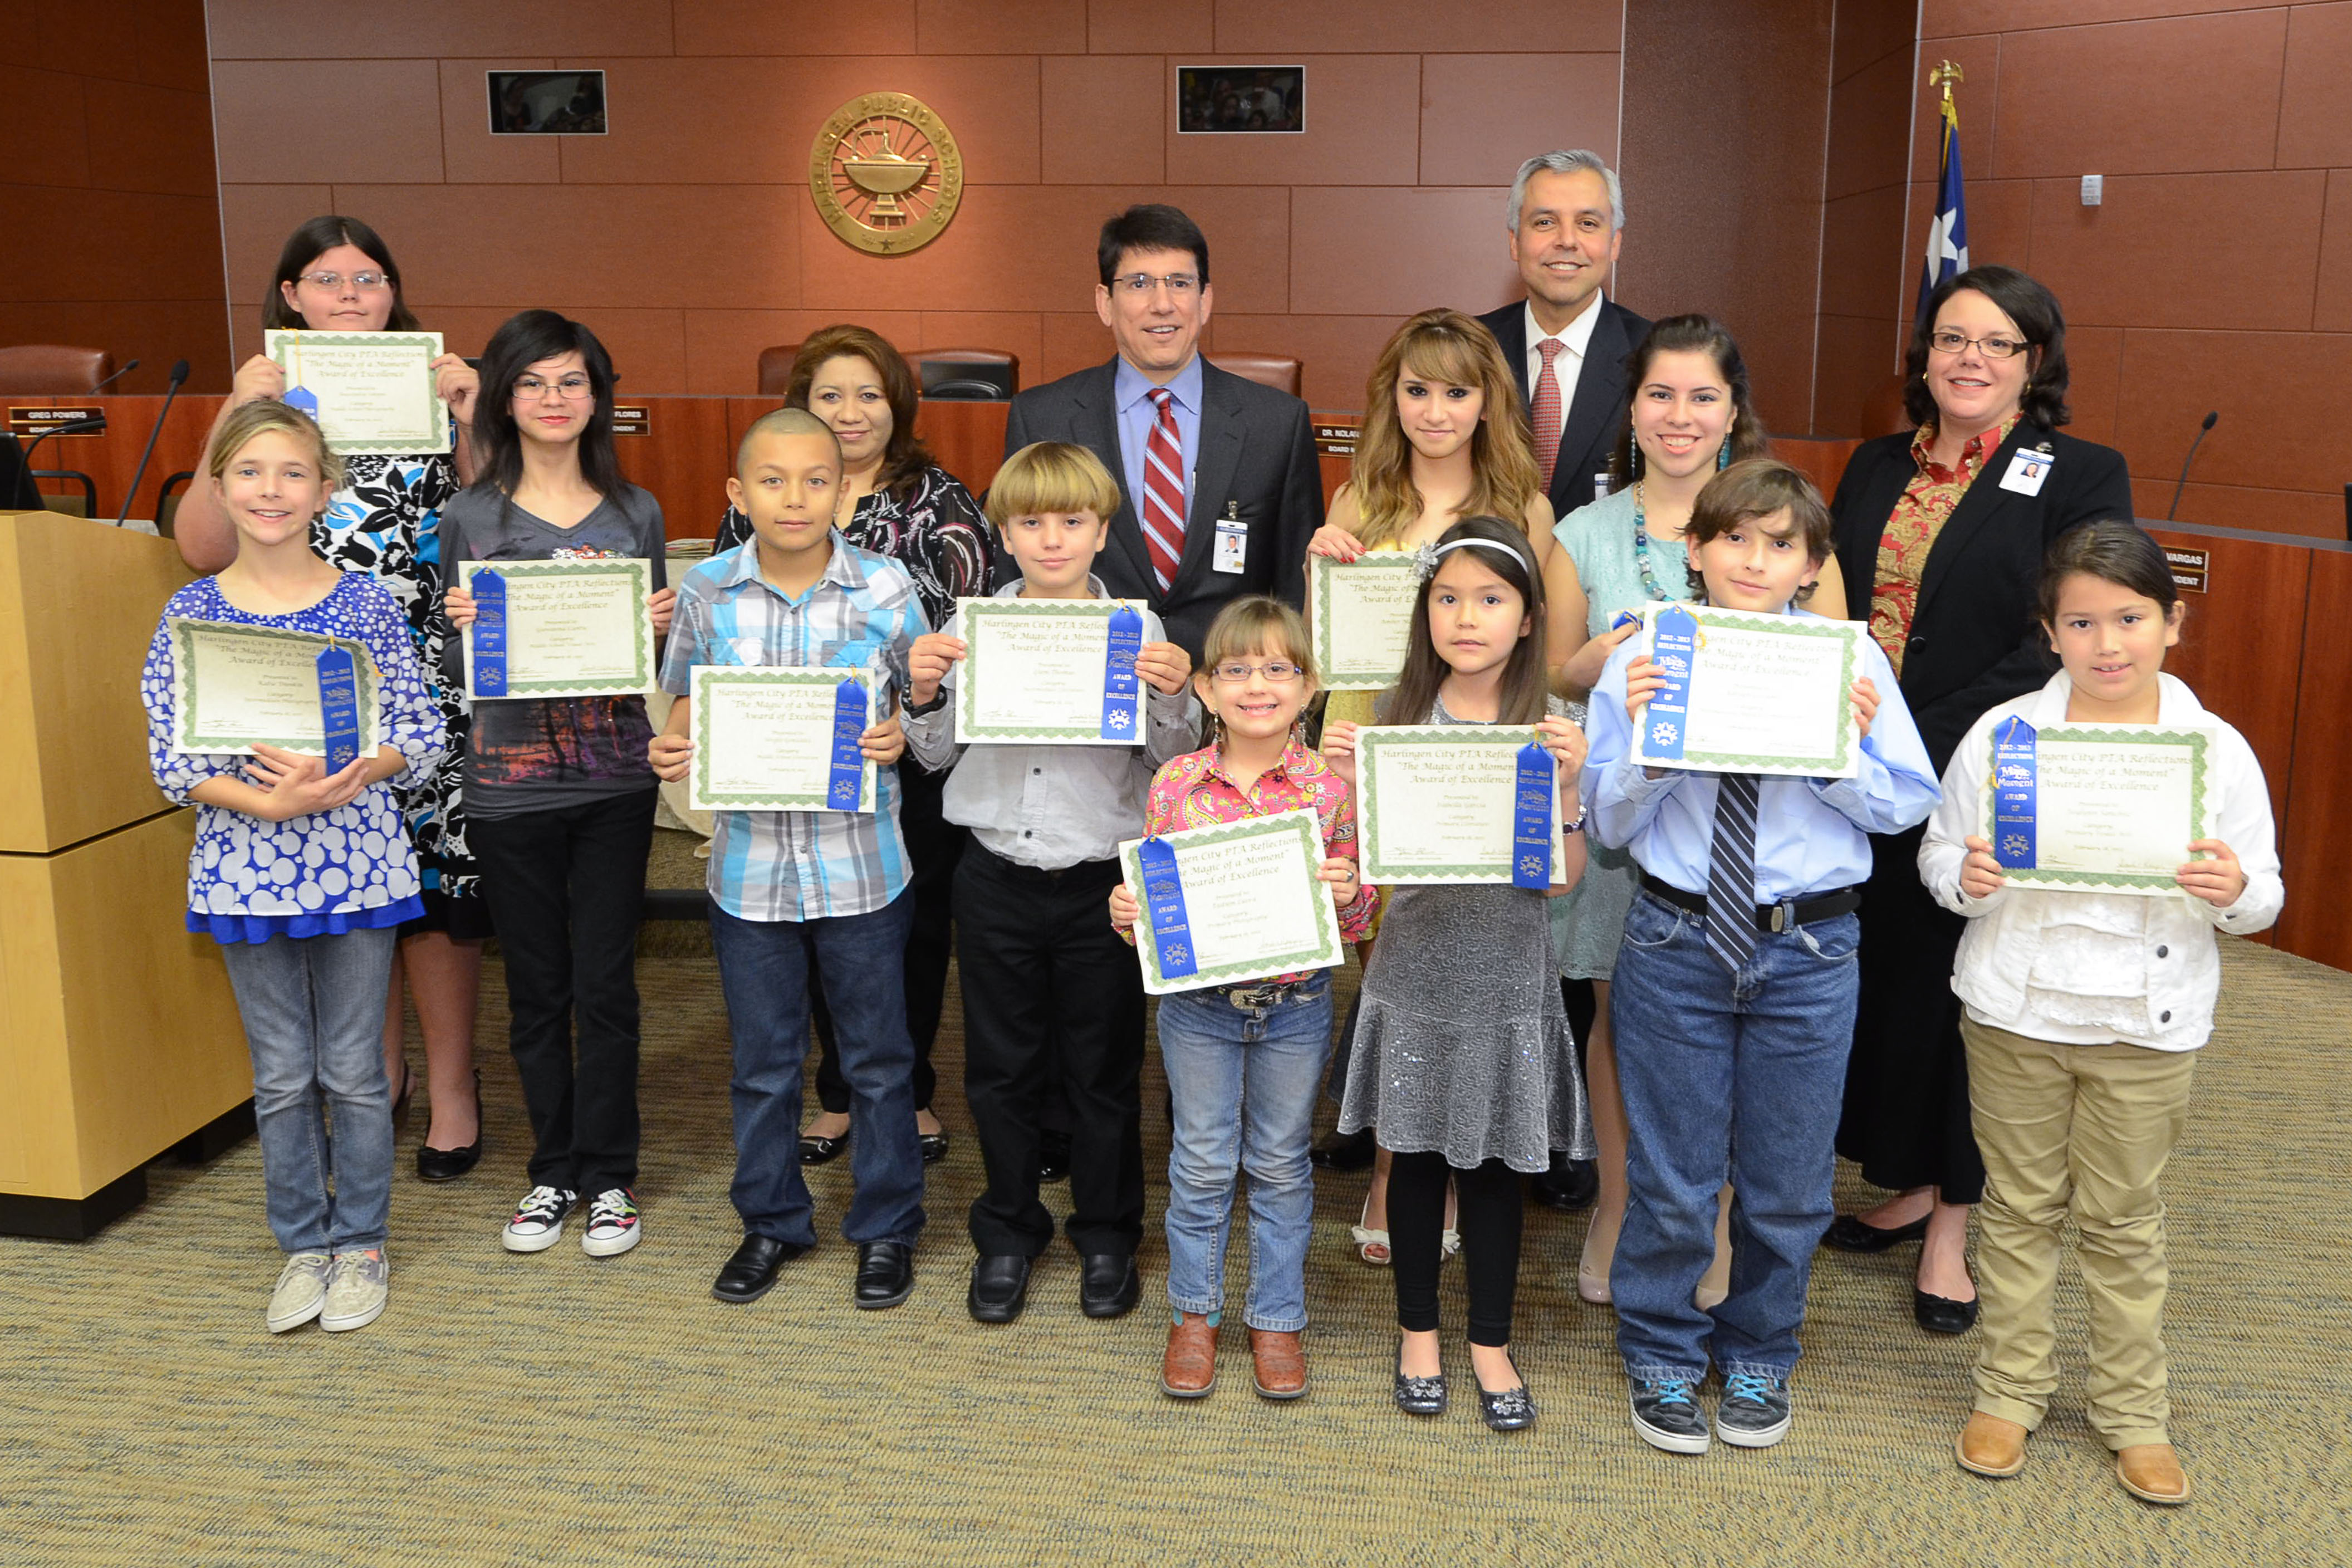 Students awarded in PTA Reflections Contest